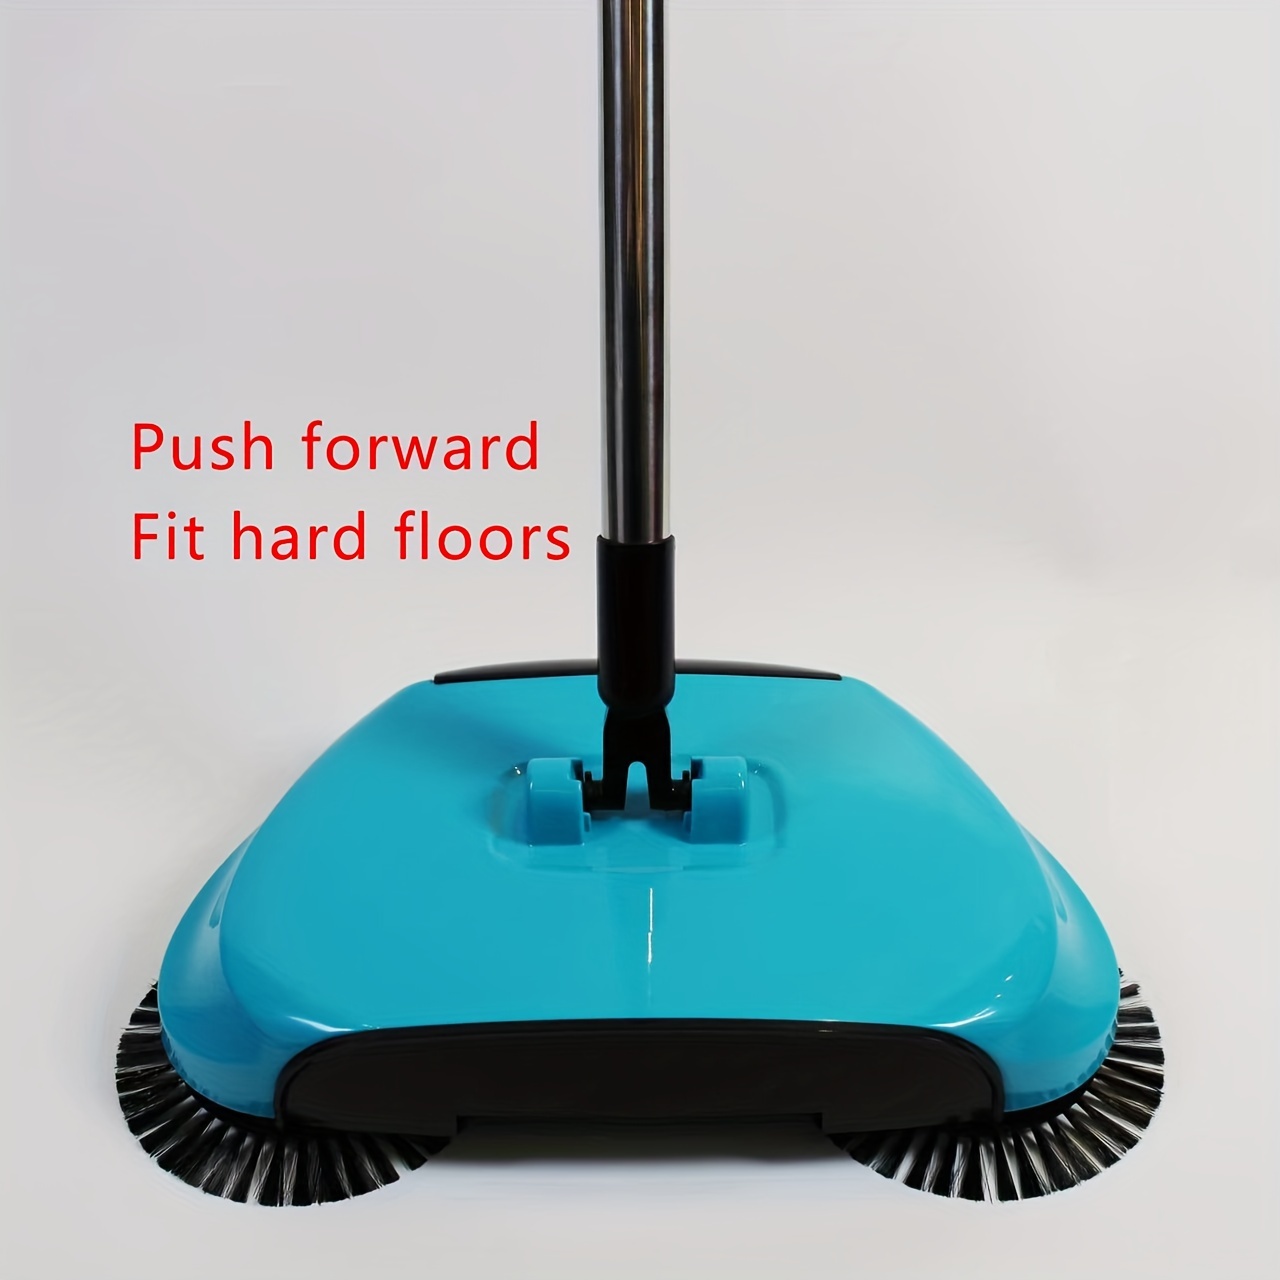 SHCKE 3 in 1 Sweeper Mop Vacuum Cleaner Hand Push Floor Cleaner Upgrade  Soft and Thick Brush + Microfiber Mop Easy to Use 